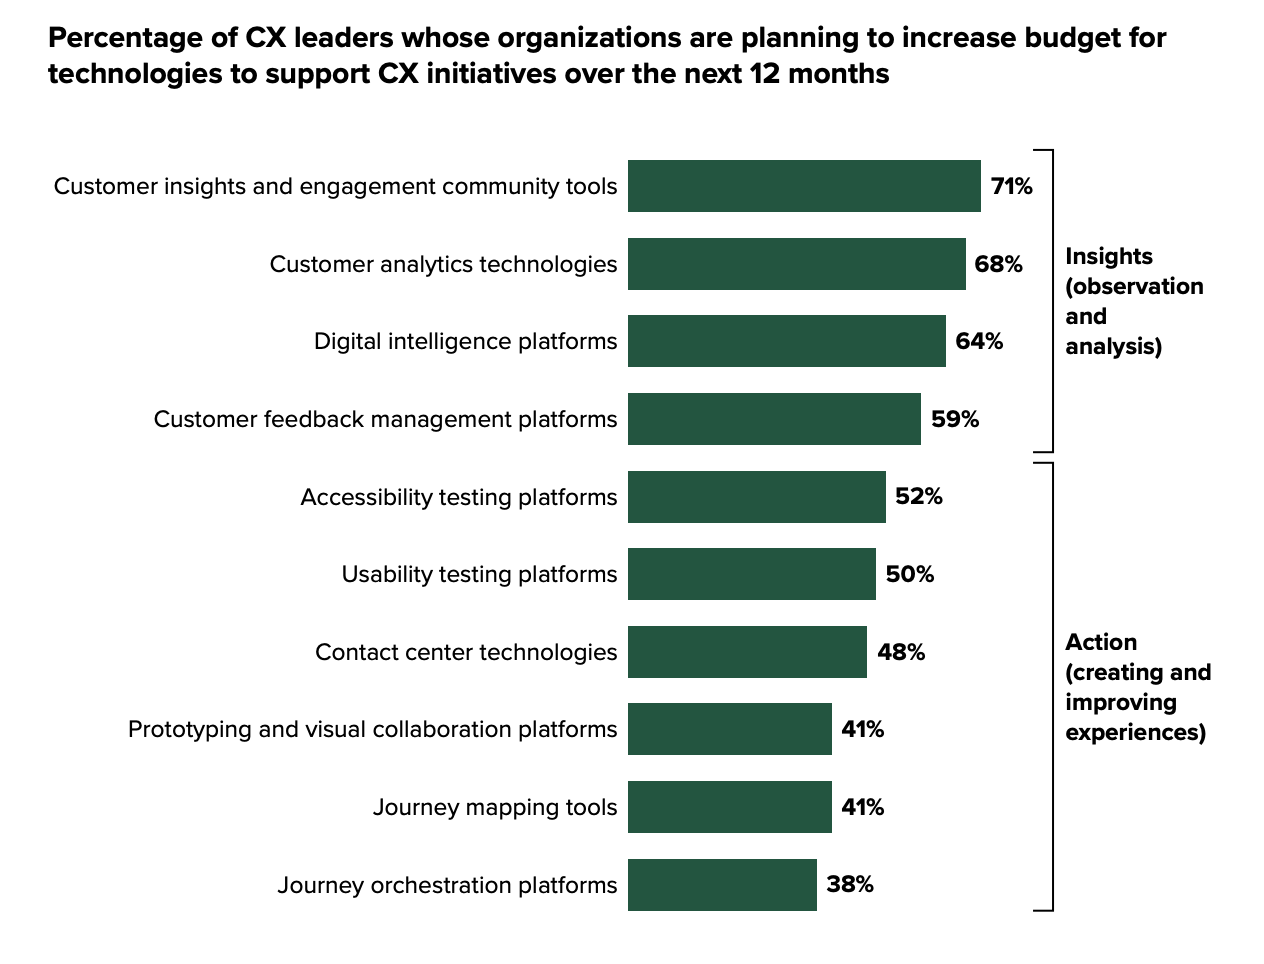 Graph showing the number of leaders planning to increase budget for CX technologies